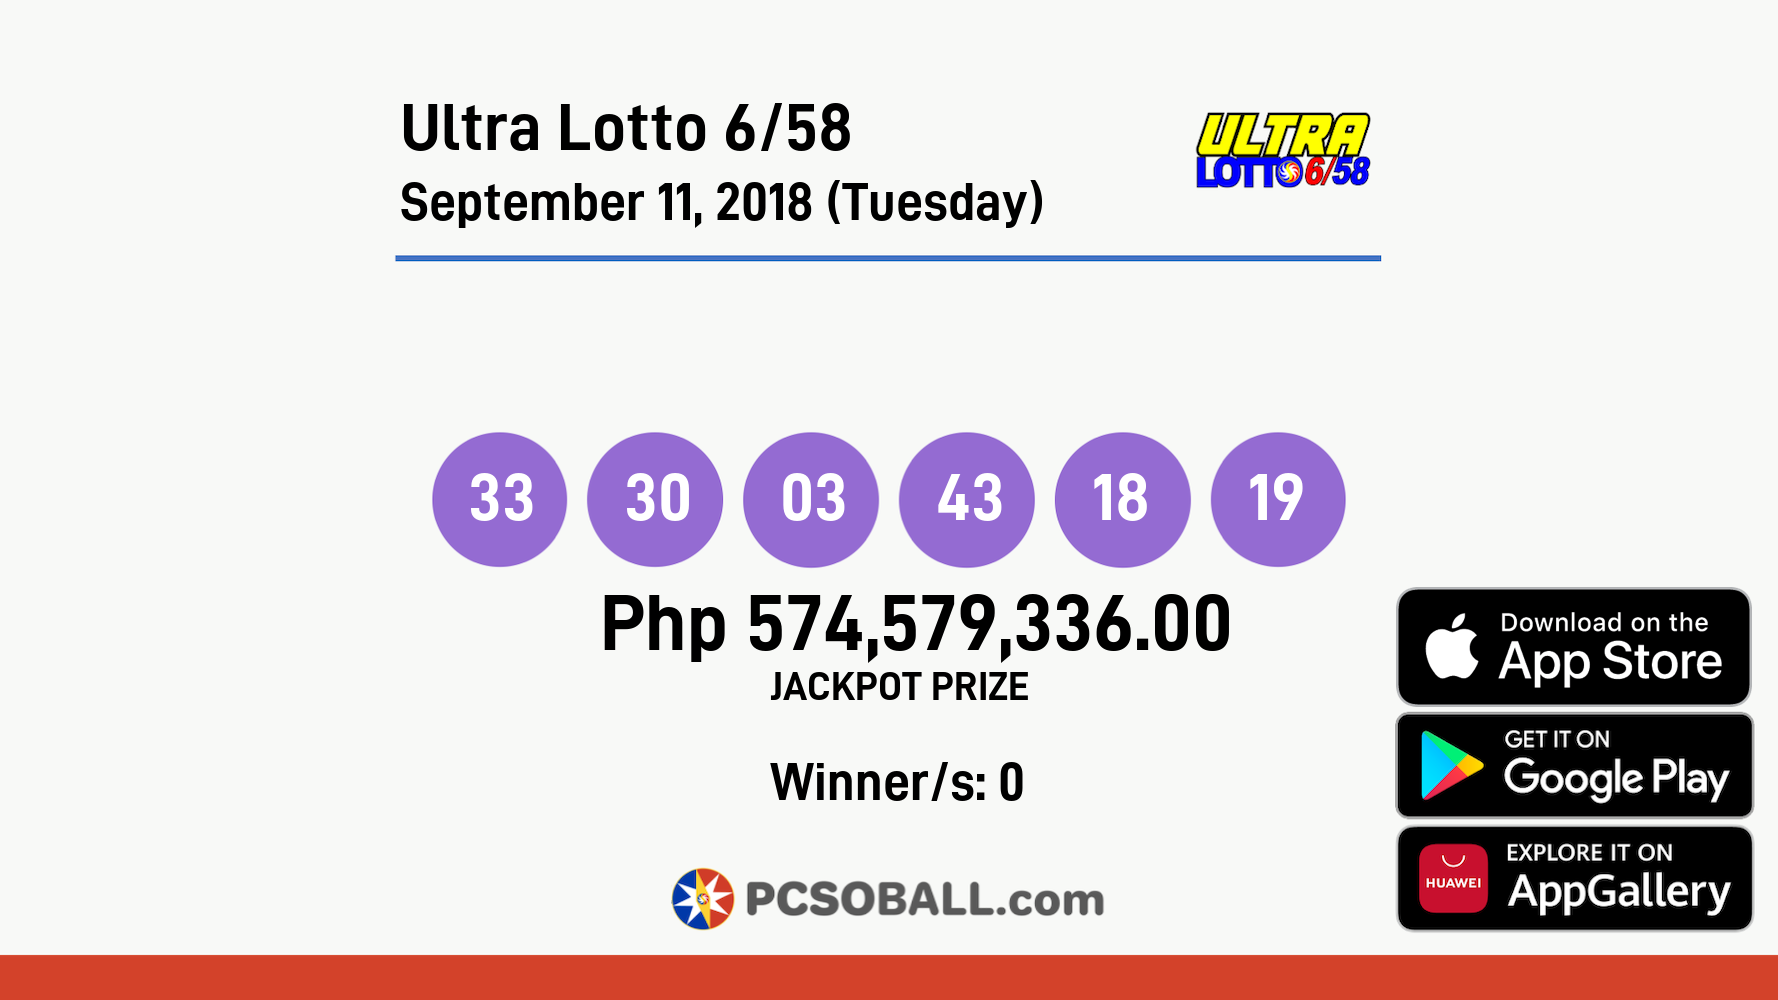 Ultra Lotto 6/58 September 11, 2018 (Tuesday) Result